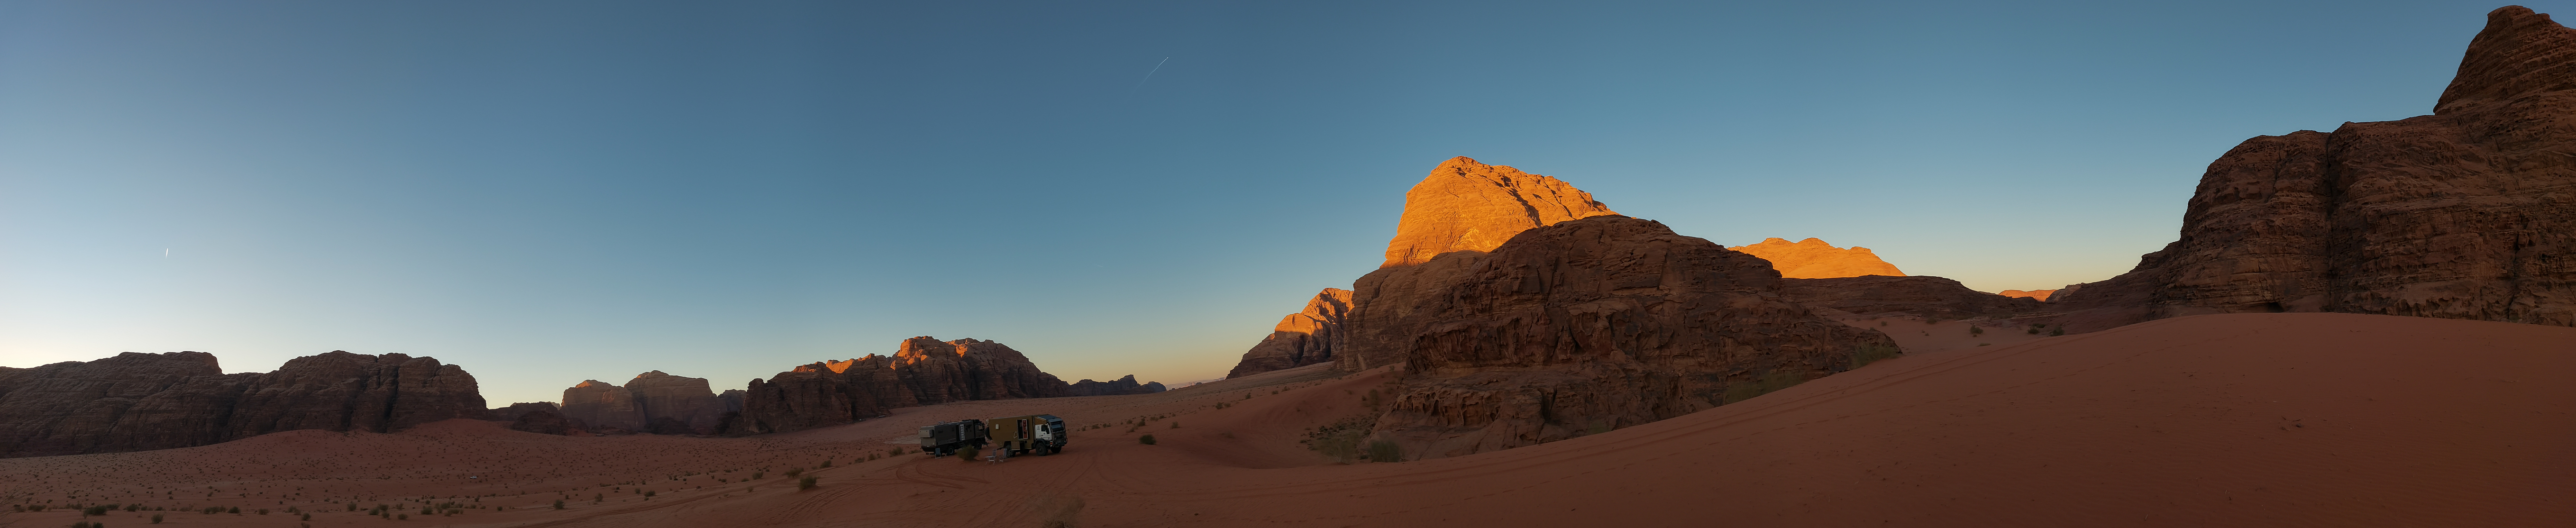 <span  class="uc_style_uc_tiles_grid_image_elementor_uc_items_attribute_title" style="color:#ffffff;">Wadi Rum</span>